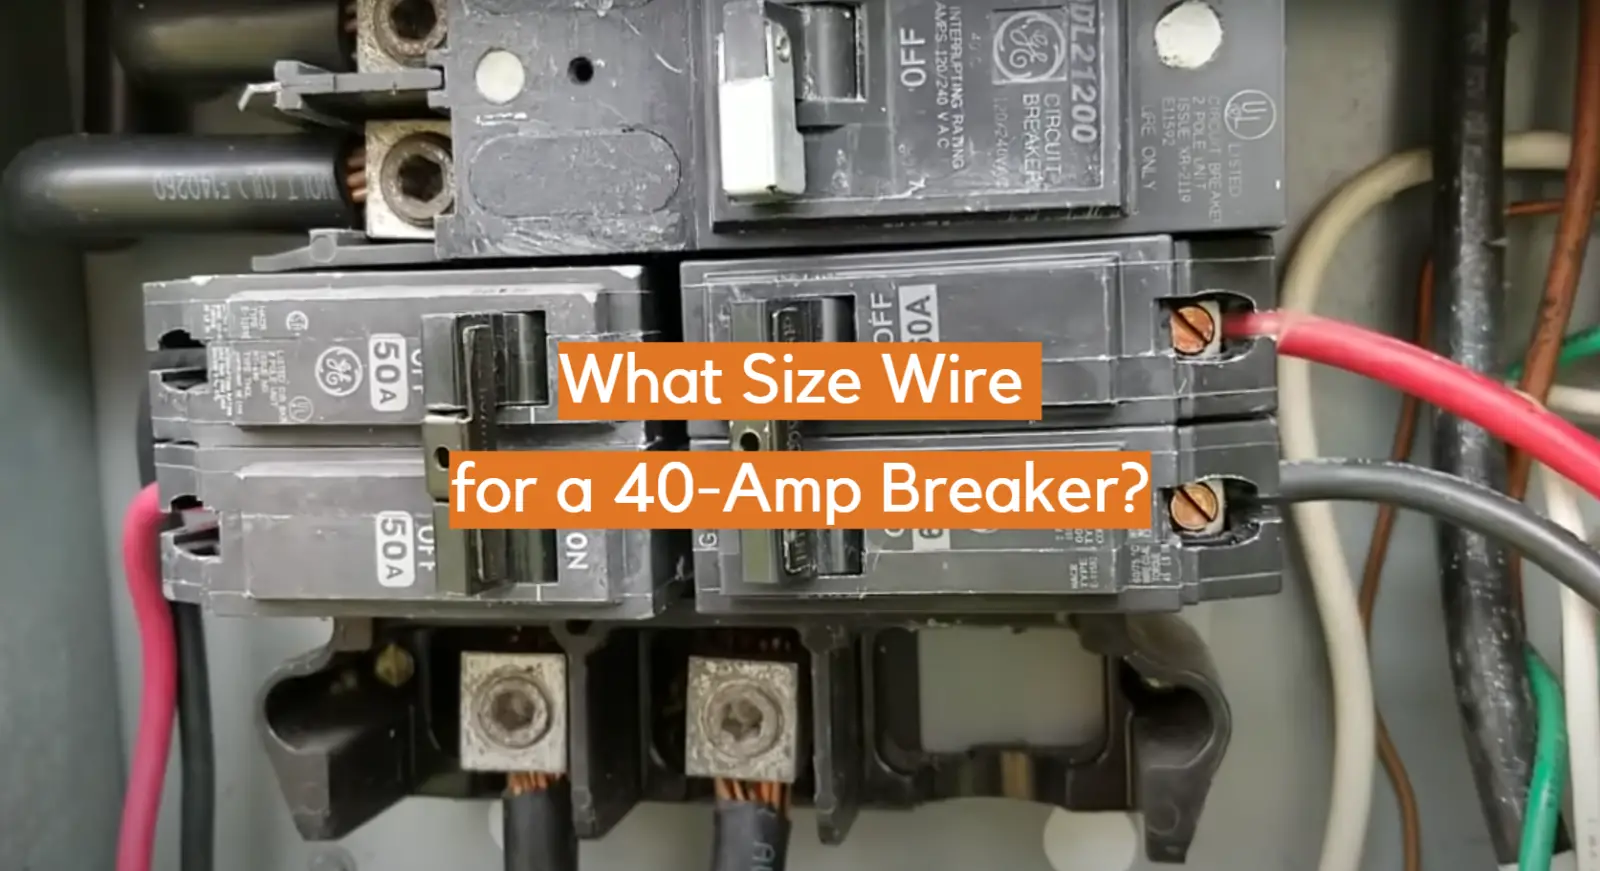 What Size Wire for a 40-Amp Breaker?